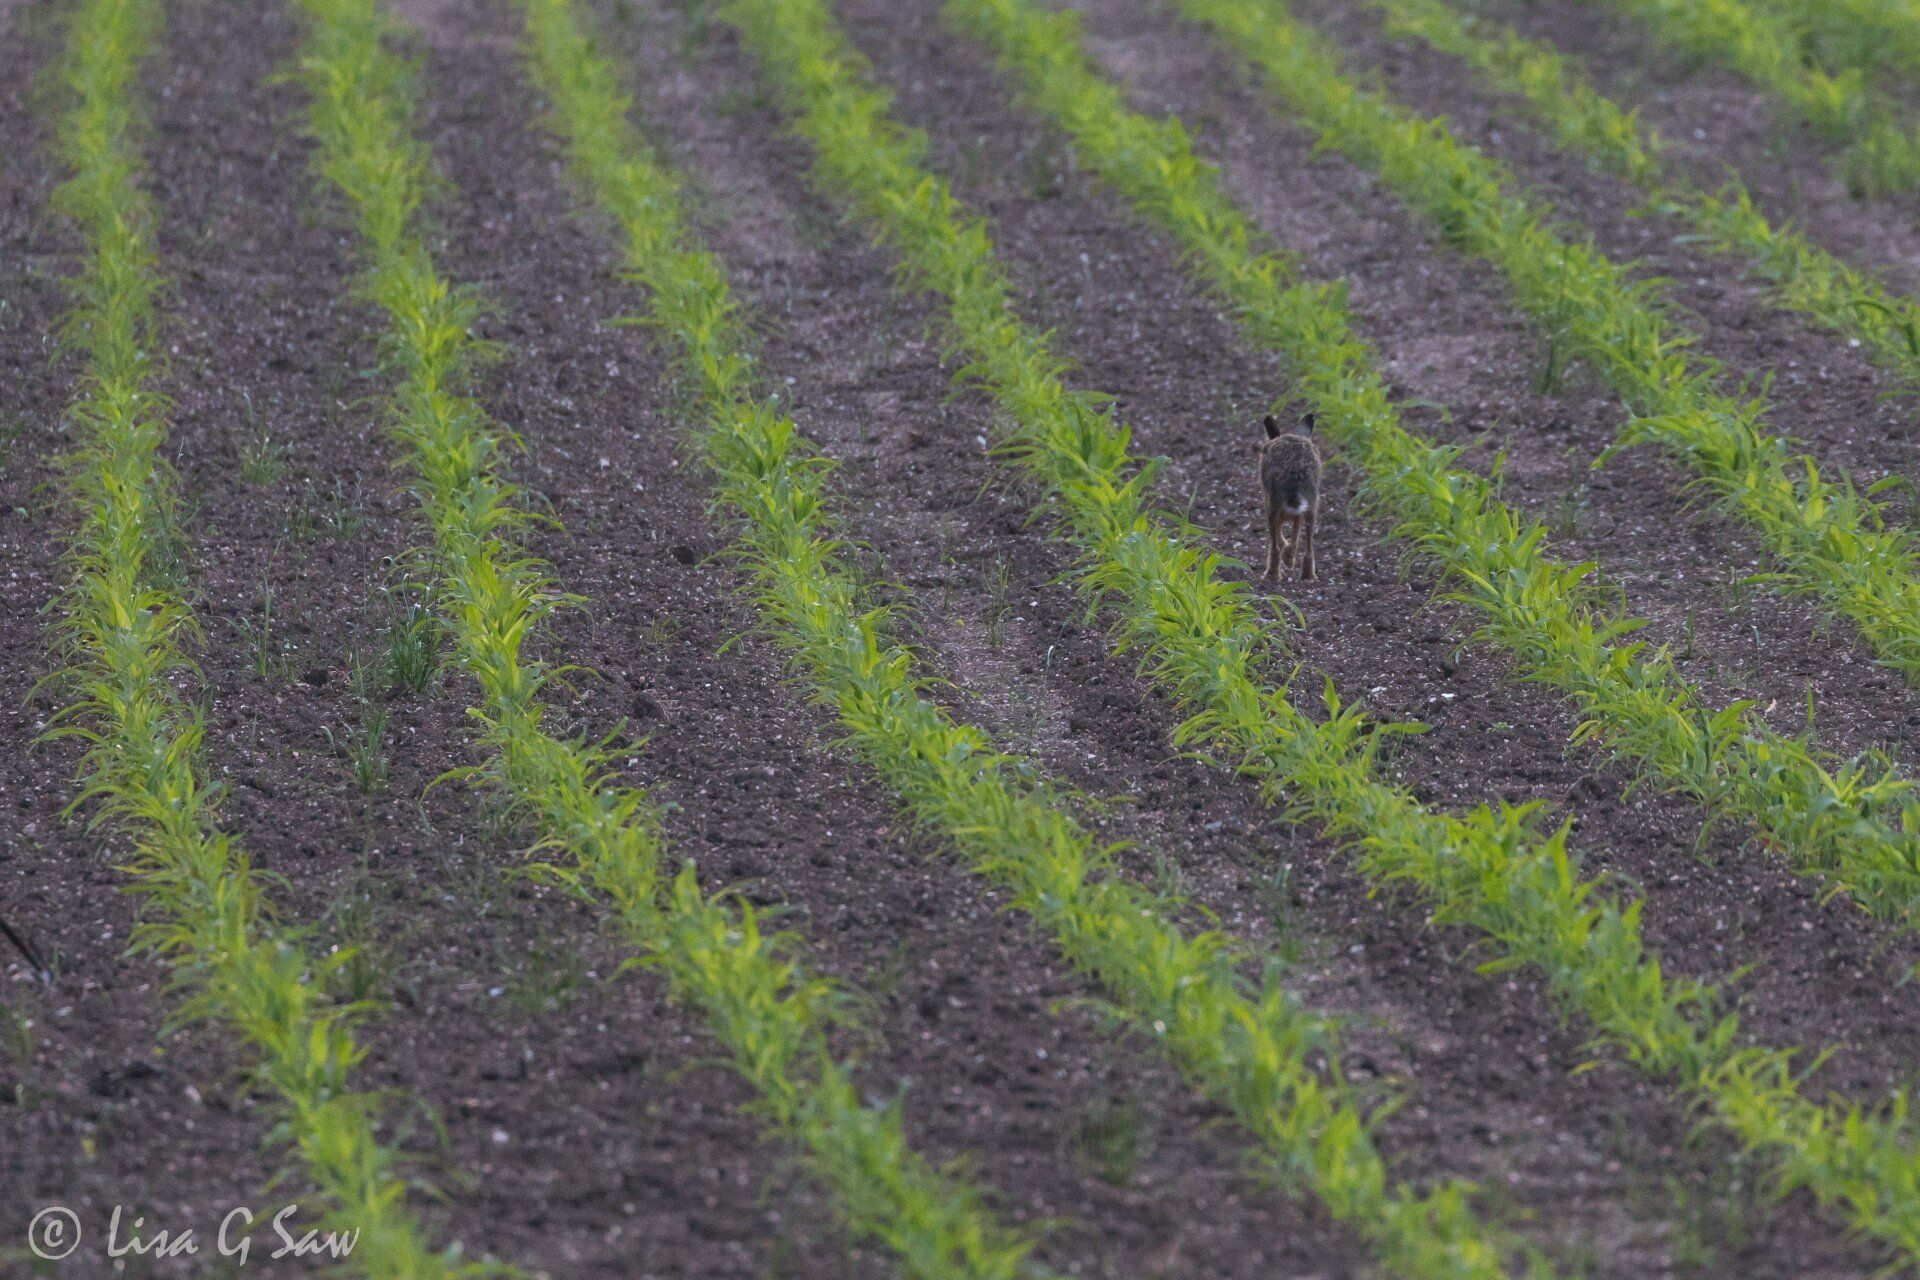 Hare running away with rows of plants